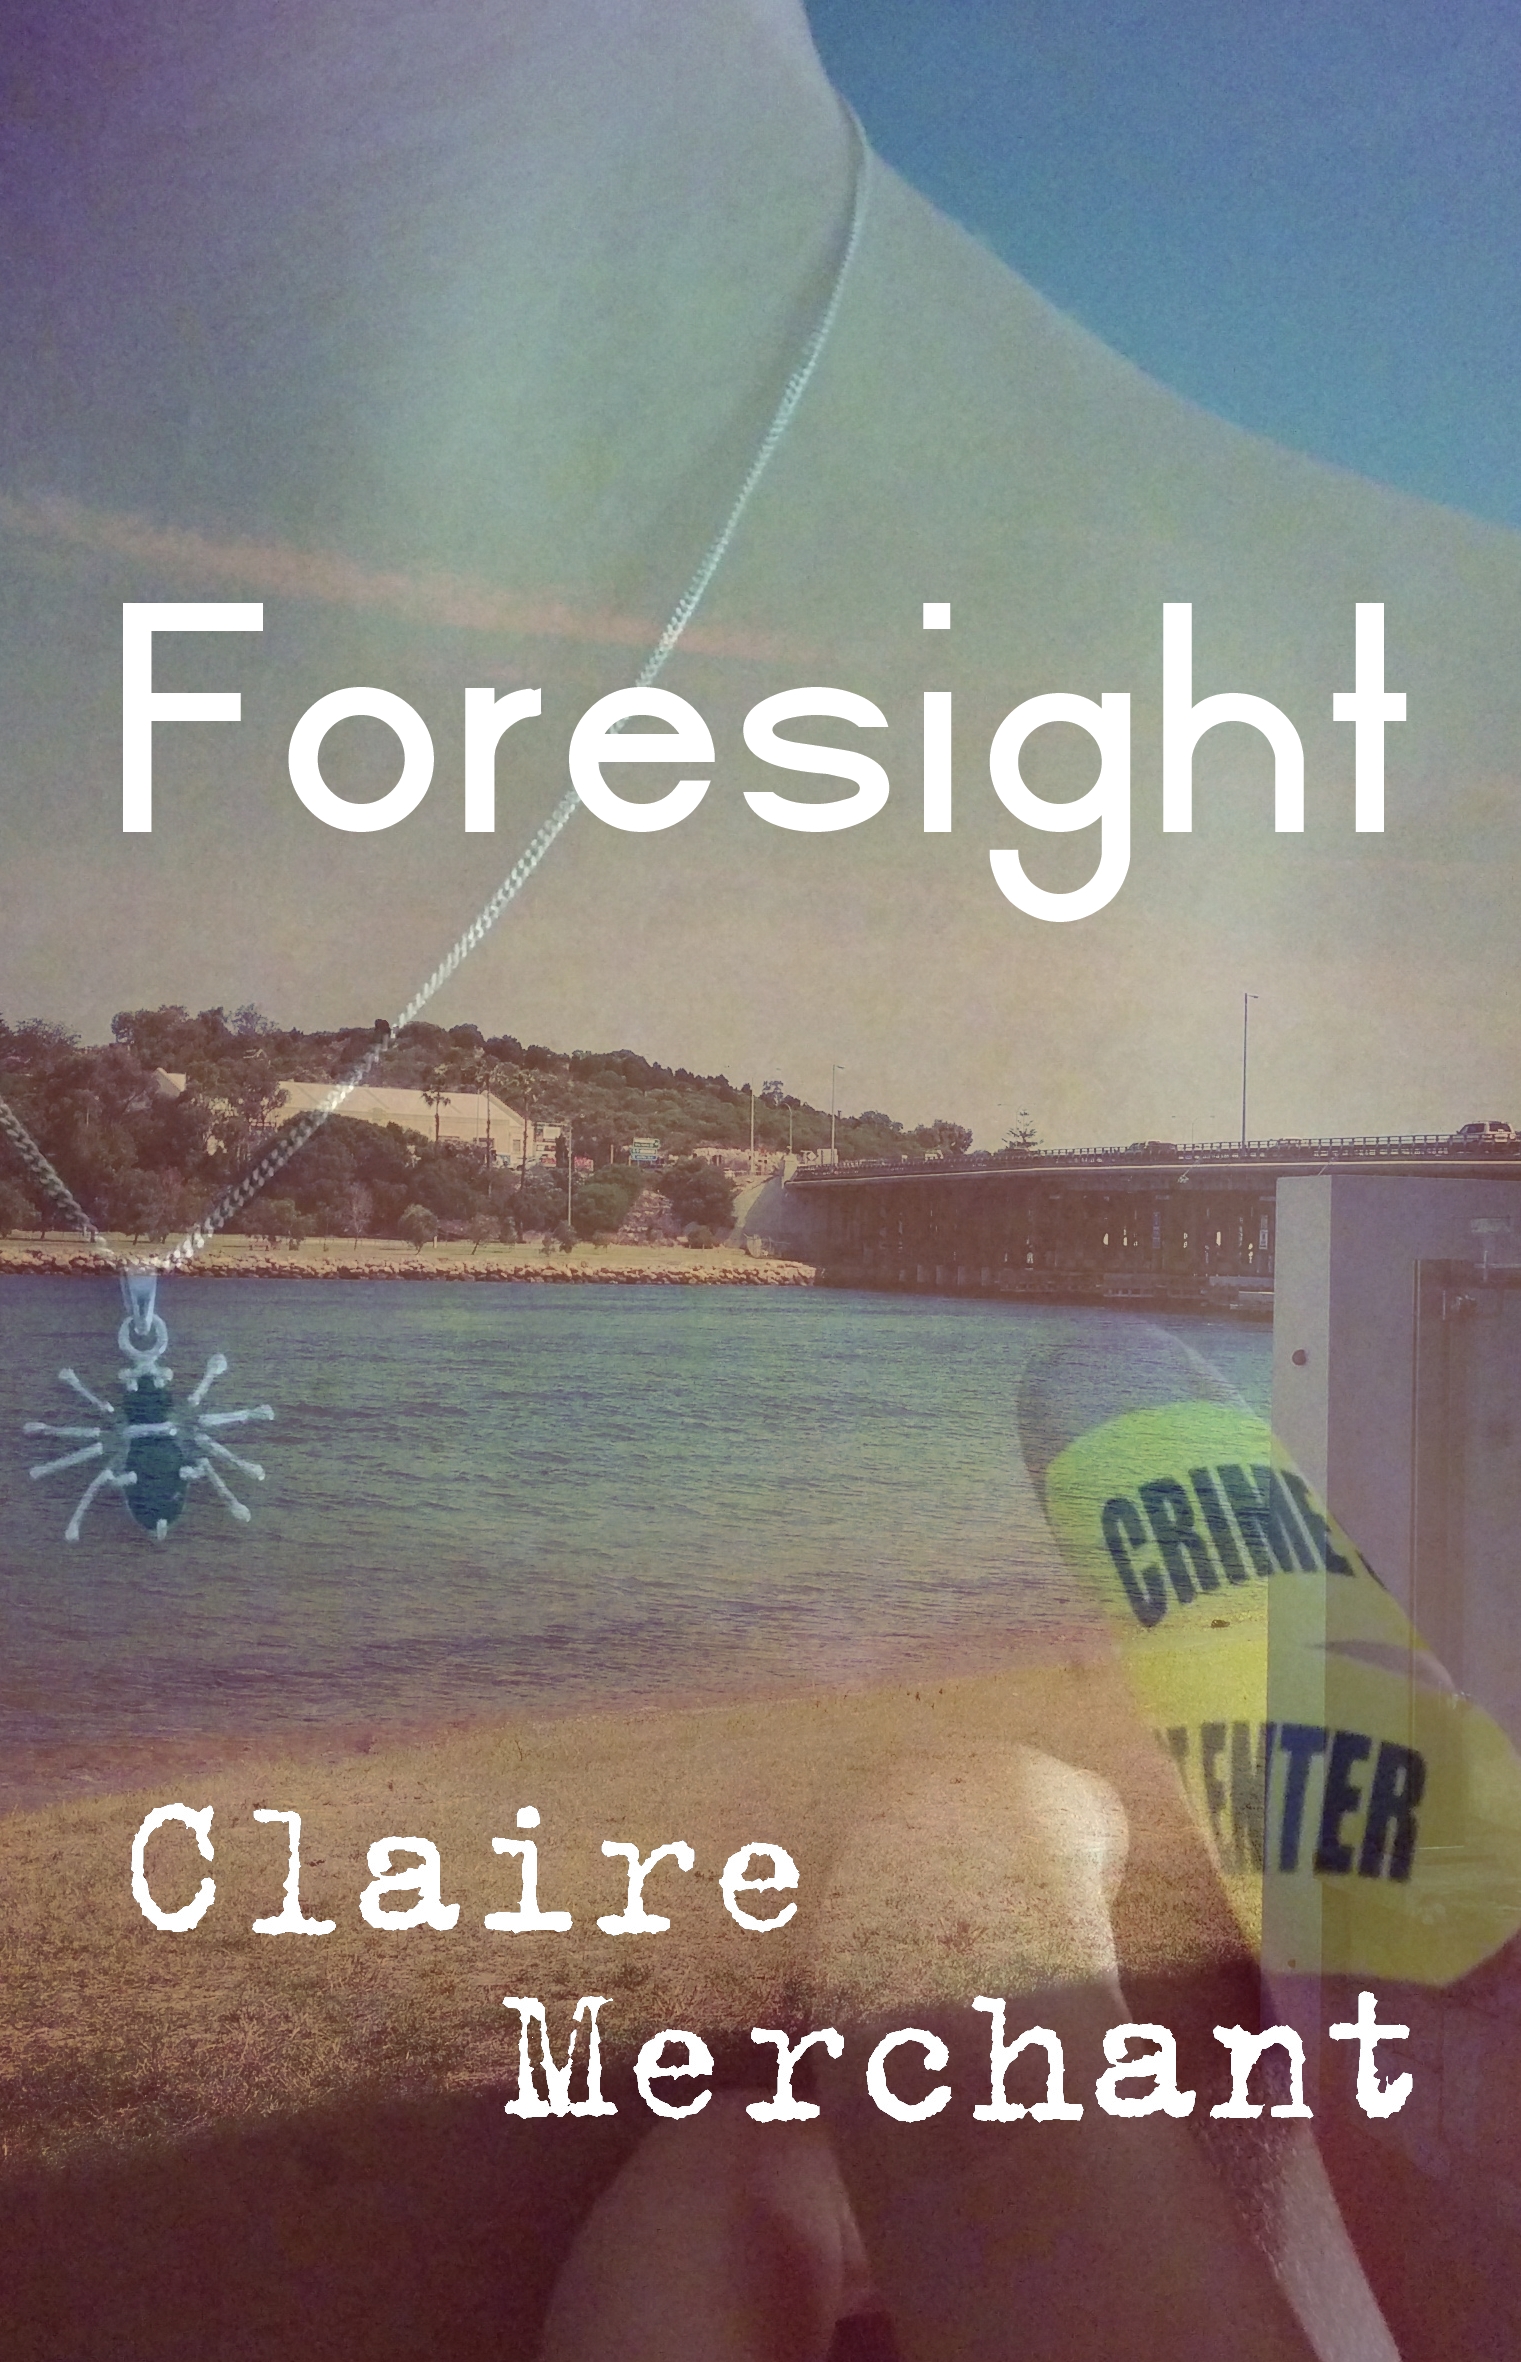 Foresight - New Cover Concept13 paperback